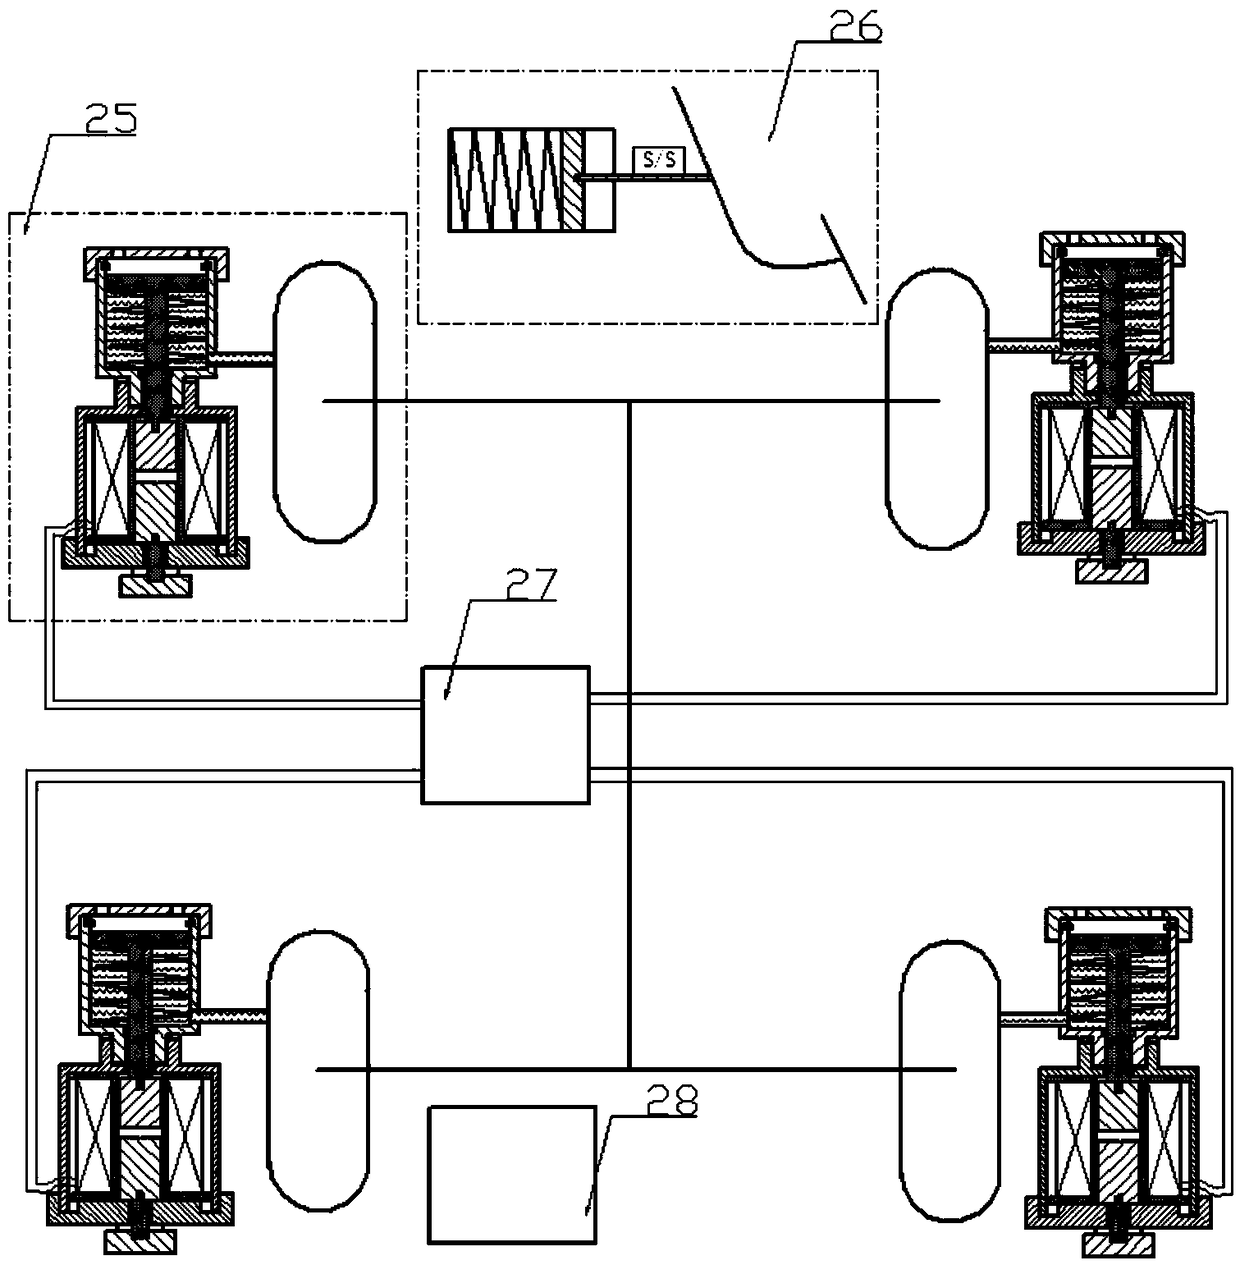 A distributed electronic hydraulic braking system